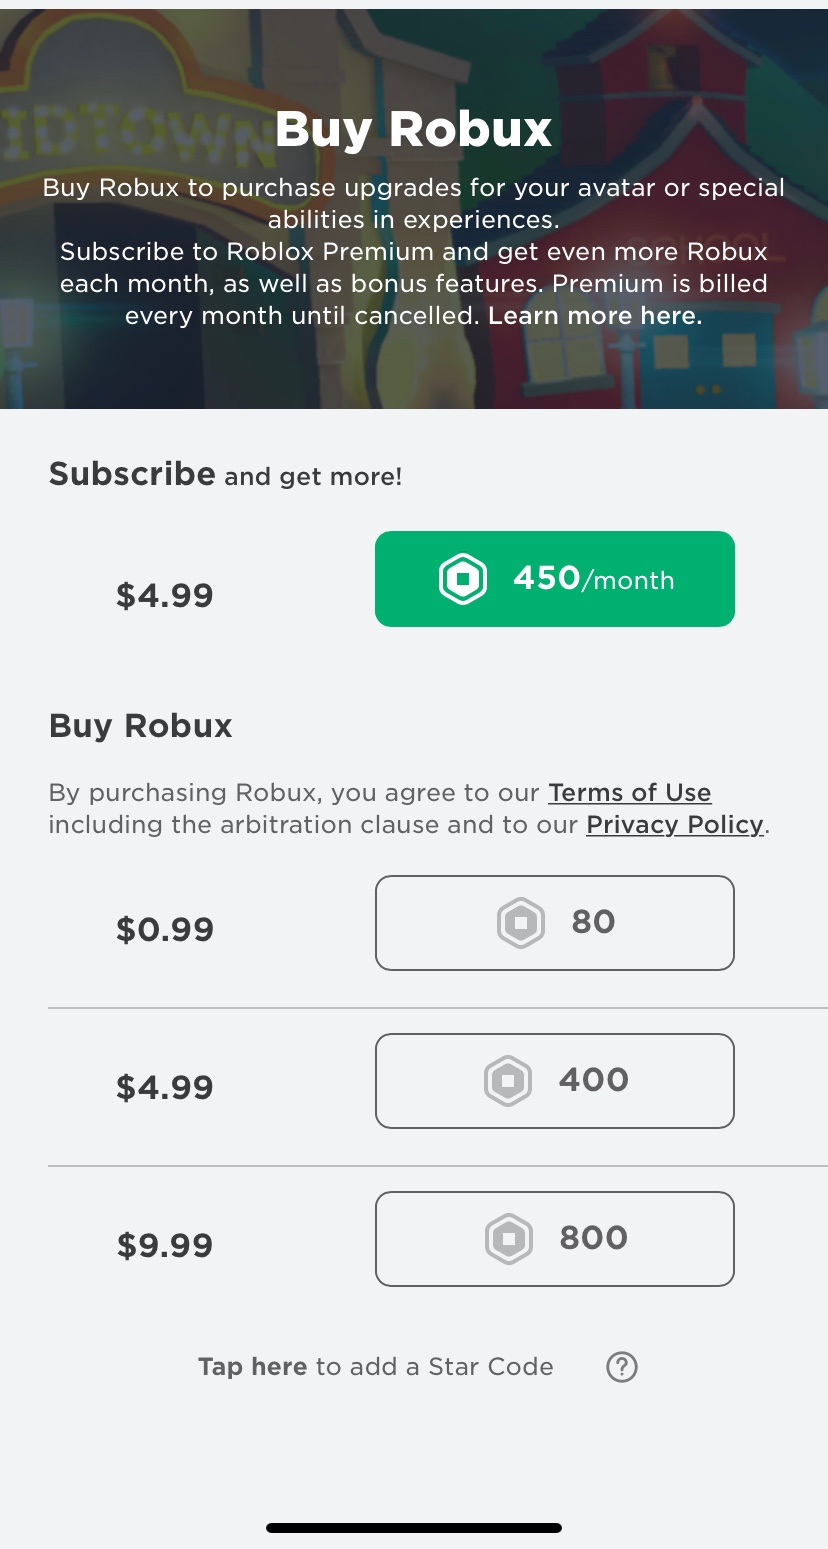 Roblox Robux - What are they and how to use them?